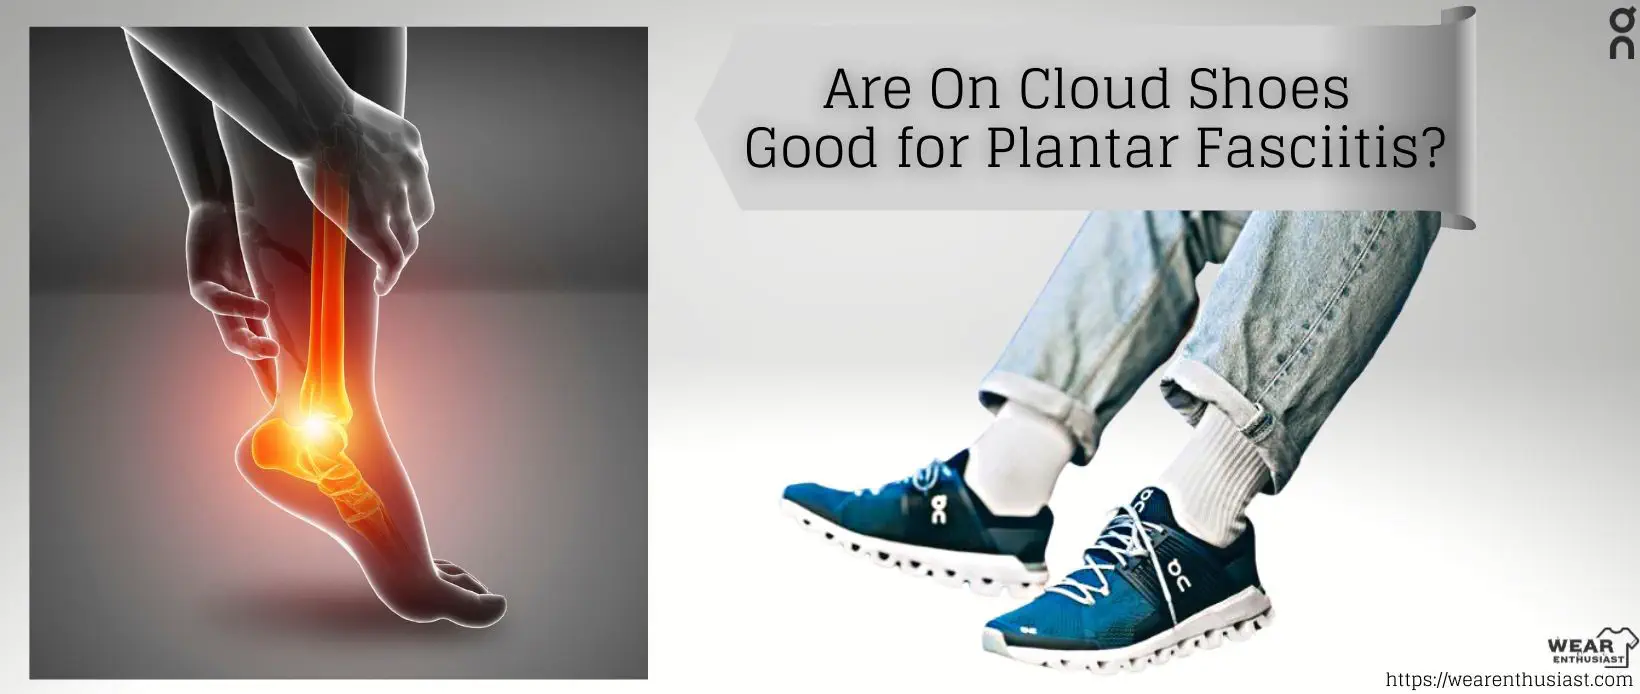 Are On Cloud Shoes Good for Plantar Fasciitis?